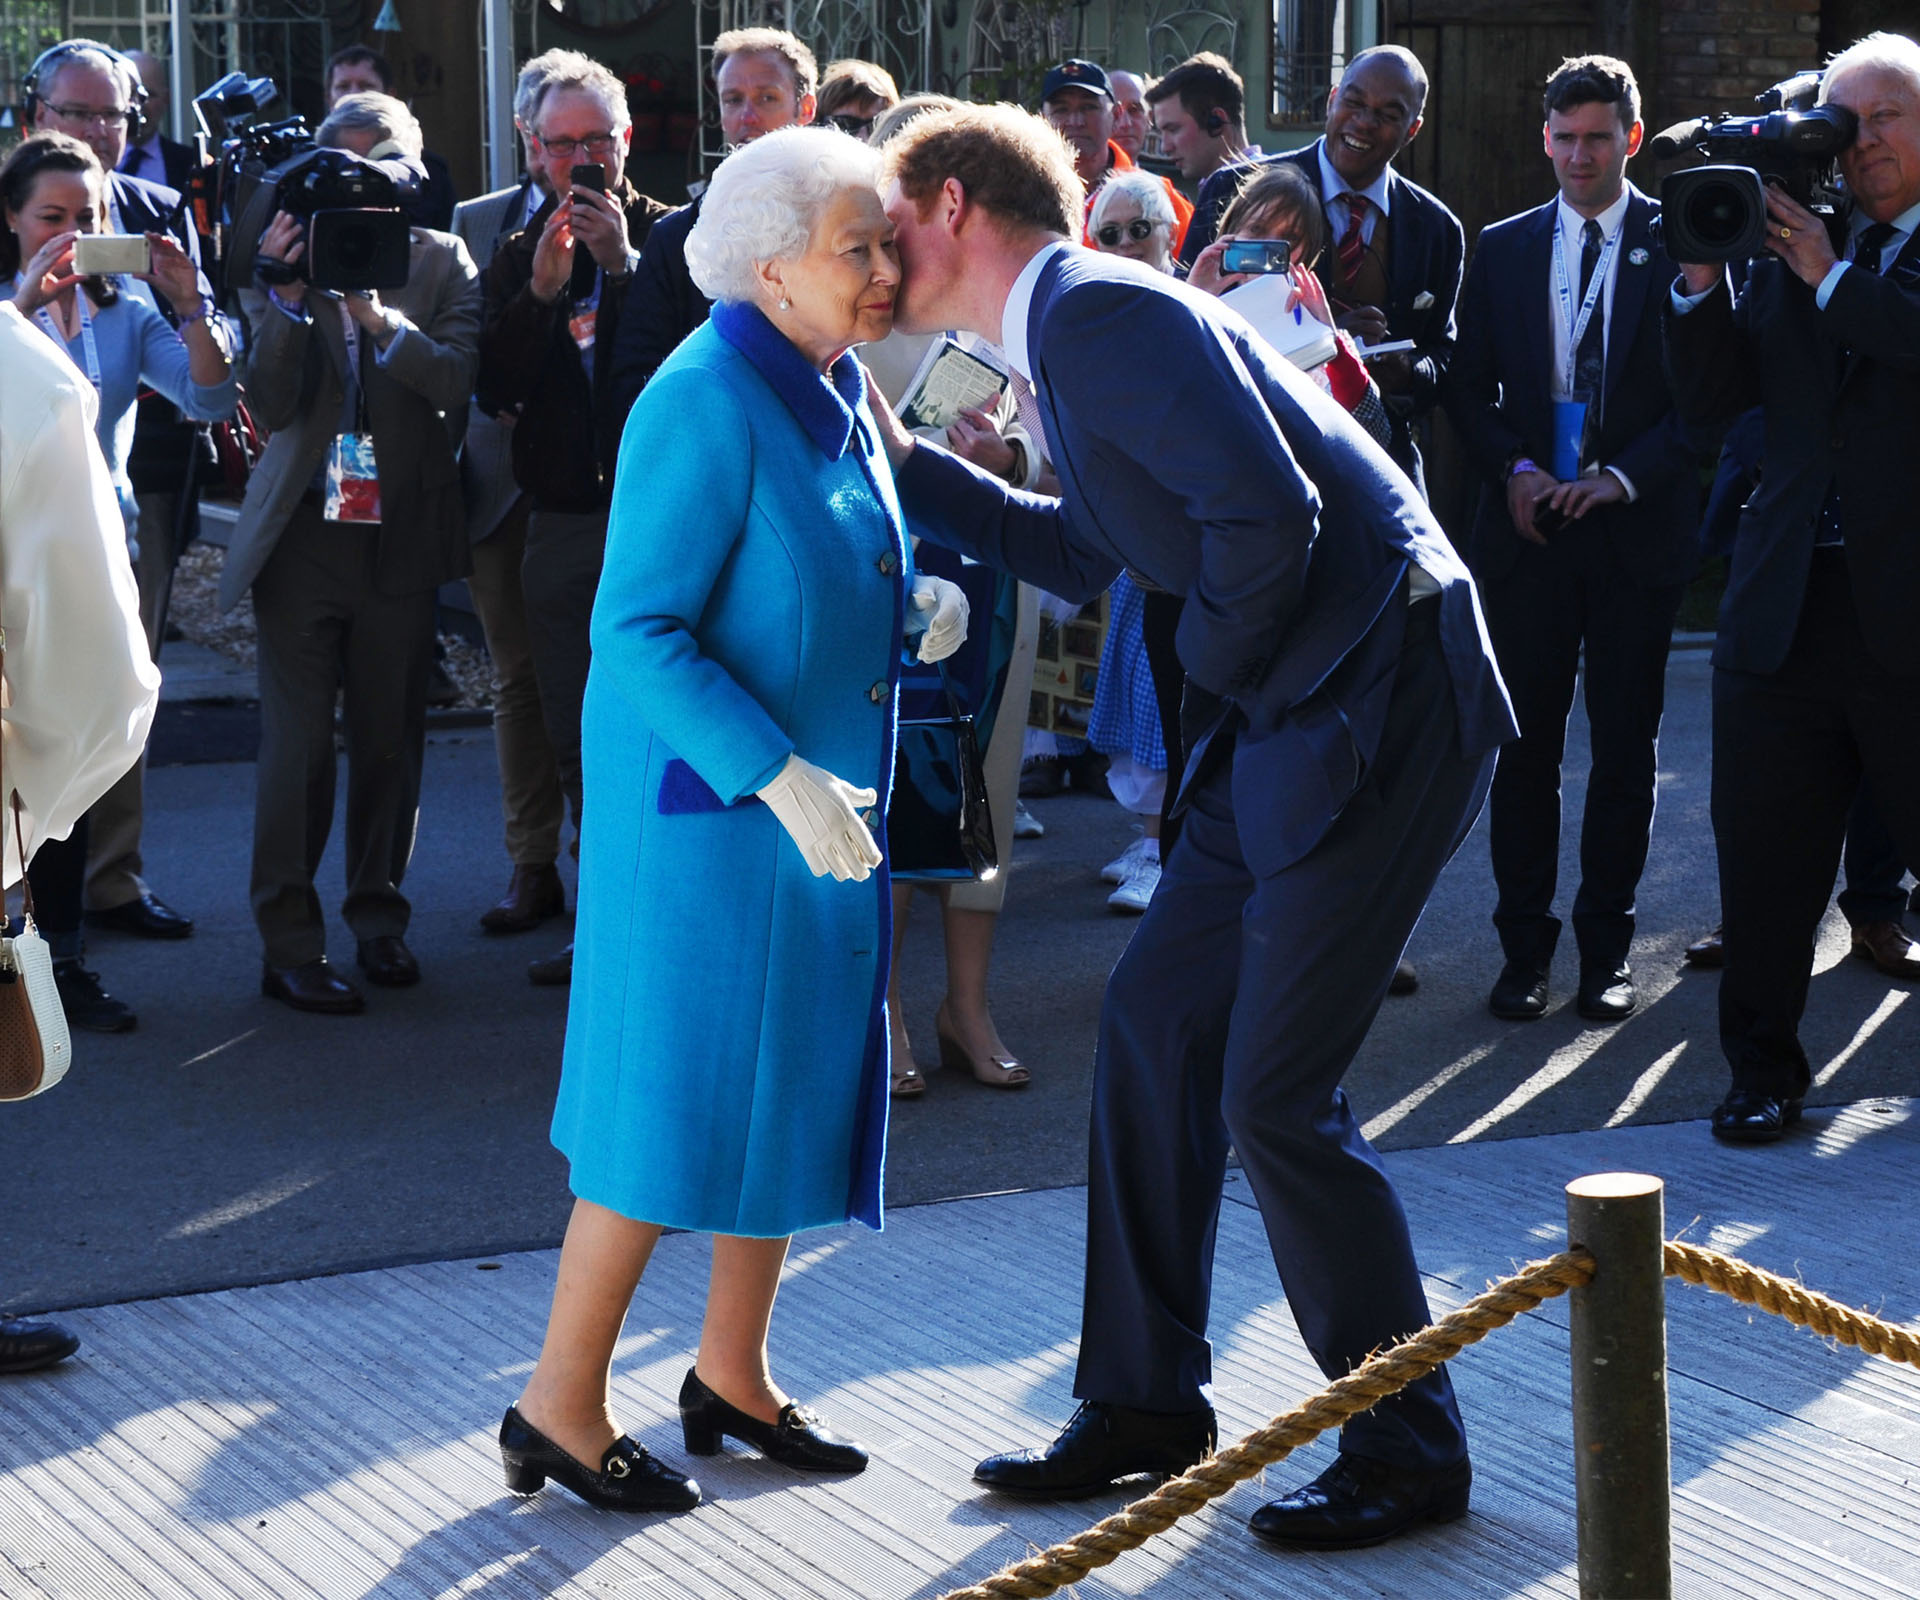 A royal reception: Prince Harry knighted by Queen